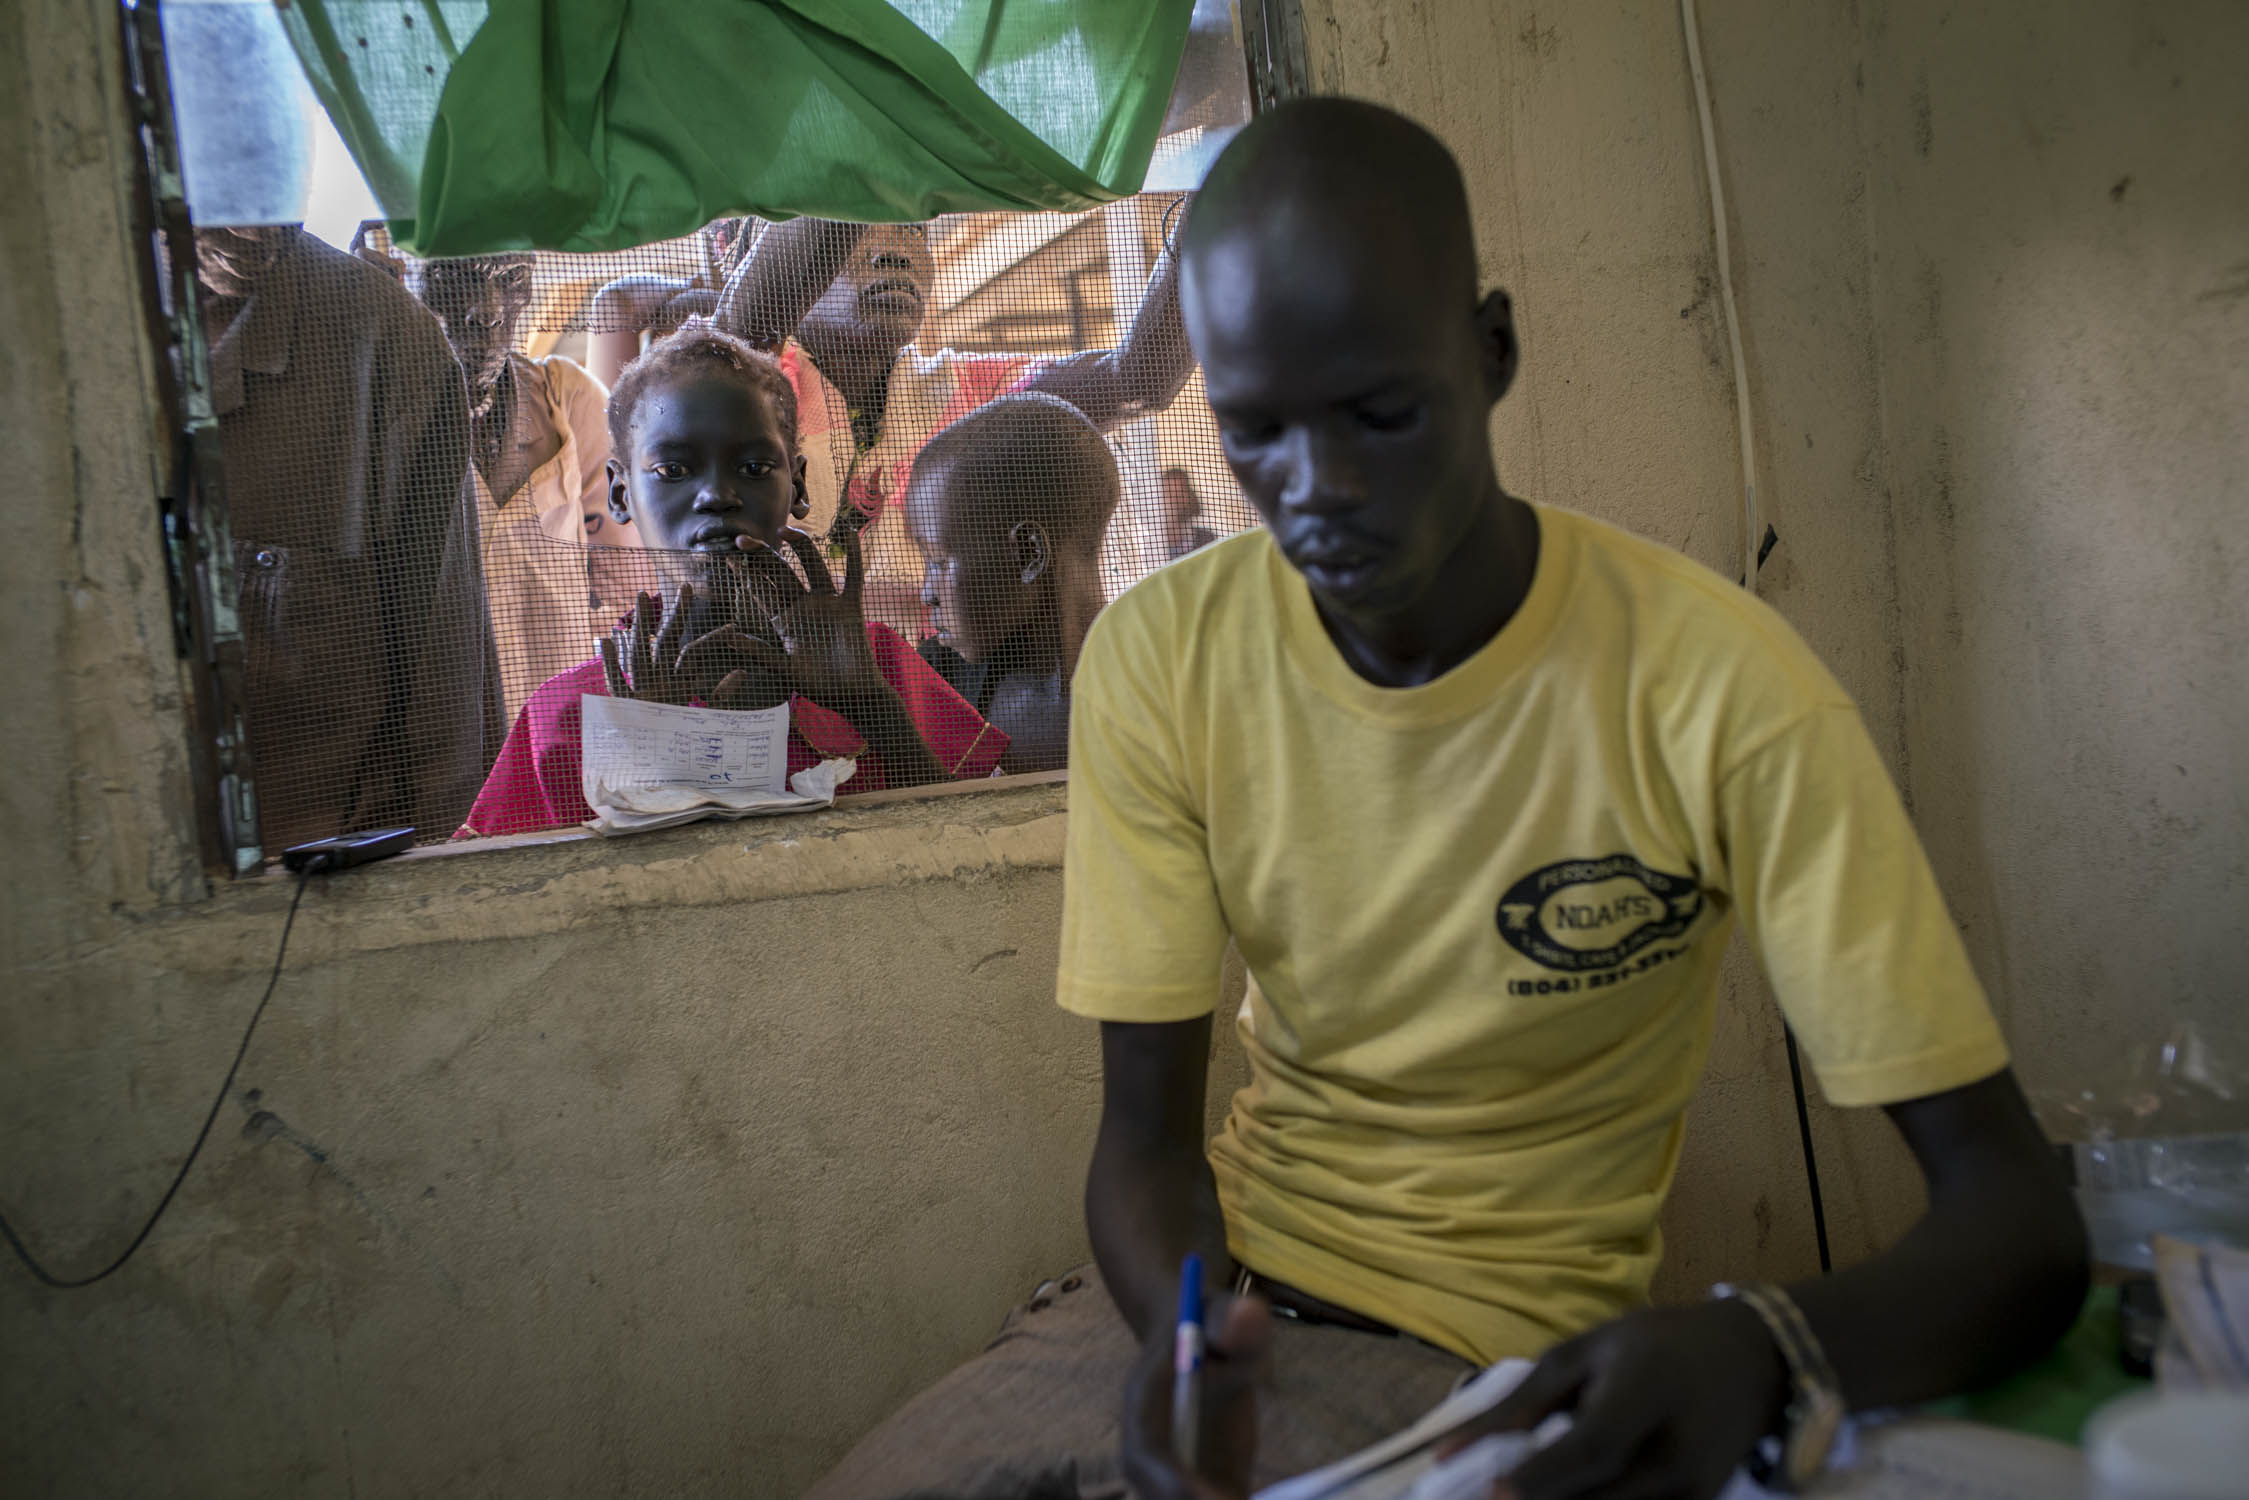  Patients wait to receive medicine at a health care center in Panthou village. Located in a remote rural area, the center was the only place in Aweil South county where patients might be able to receive free treatment and medicine for malaria. Only t